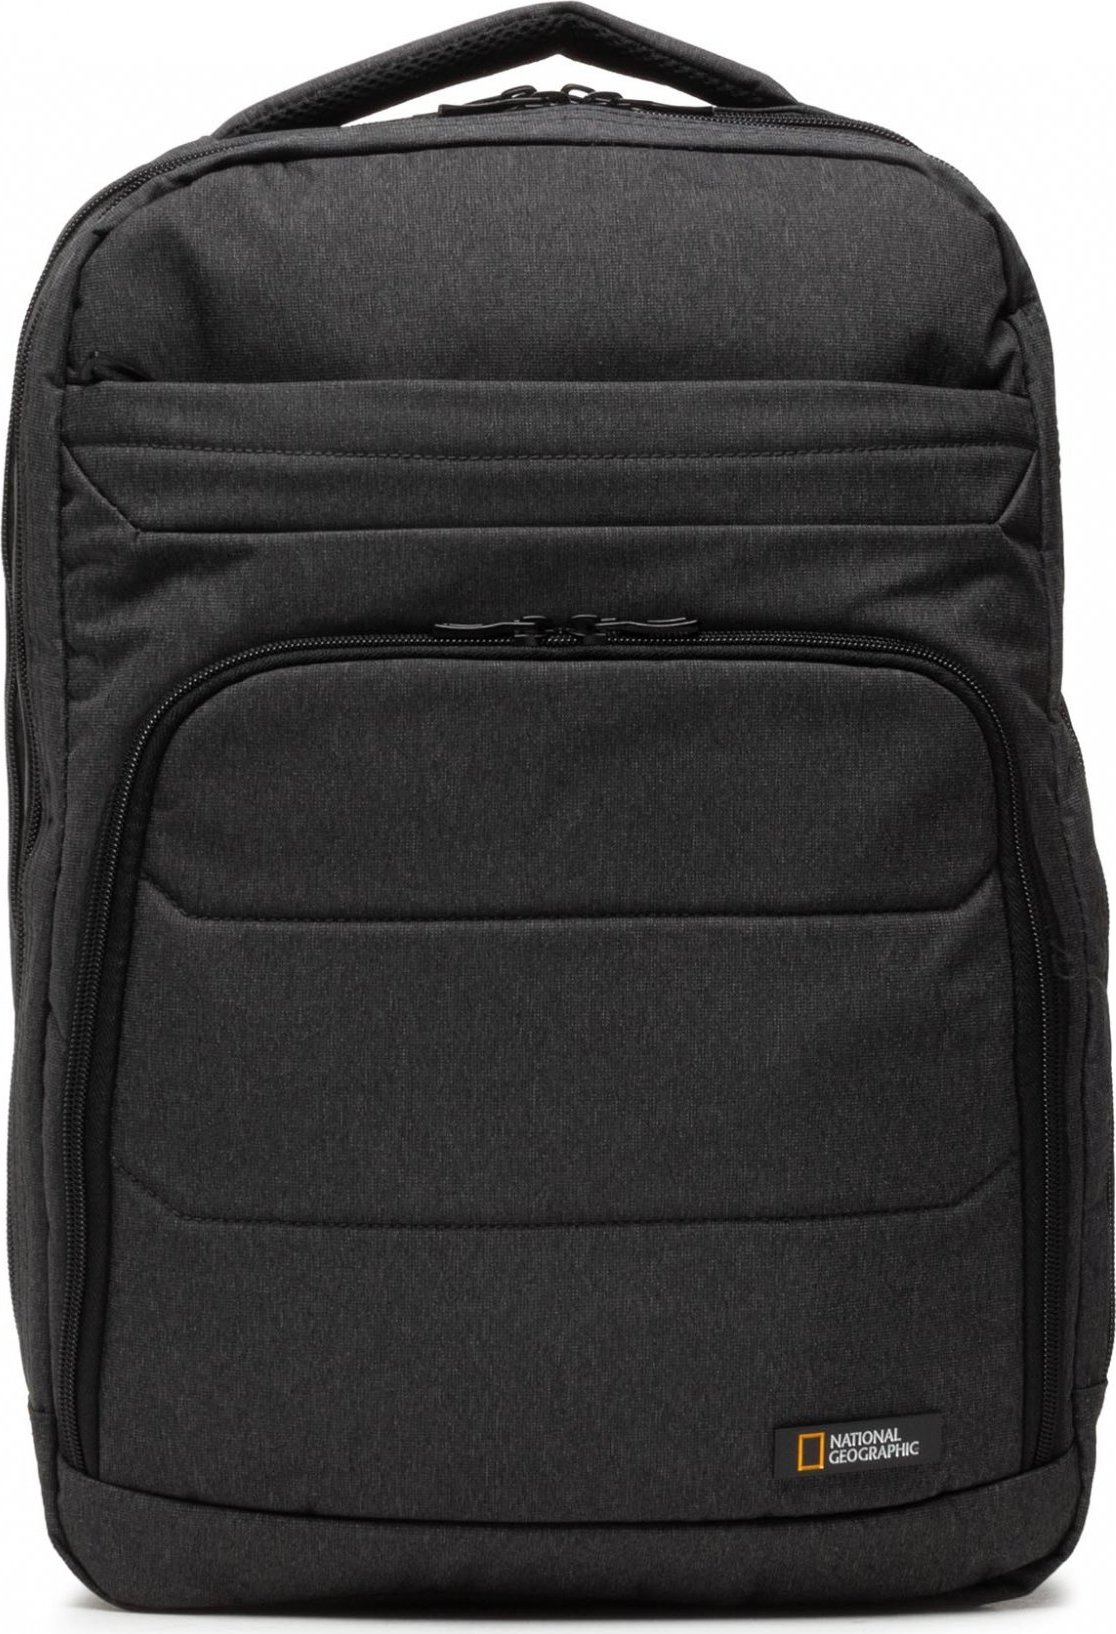 National Geographic Backpack-2 Compartment N00710.125